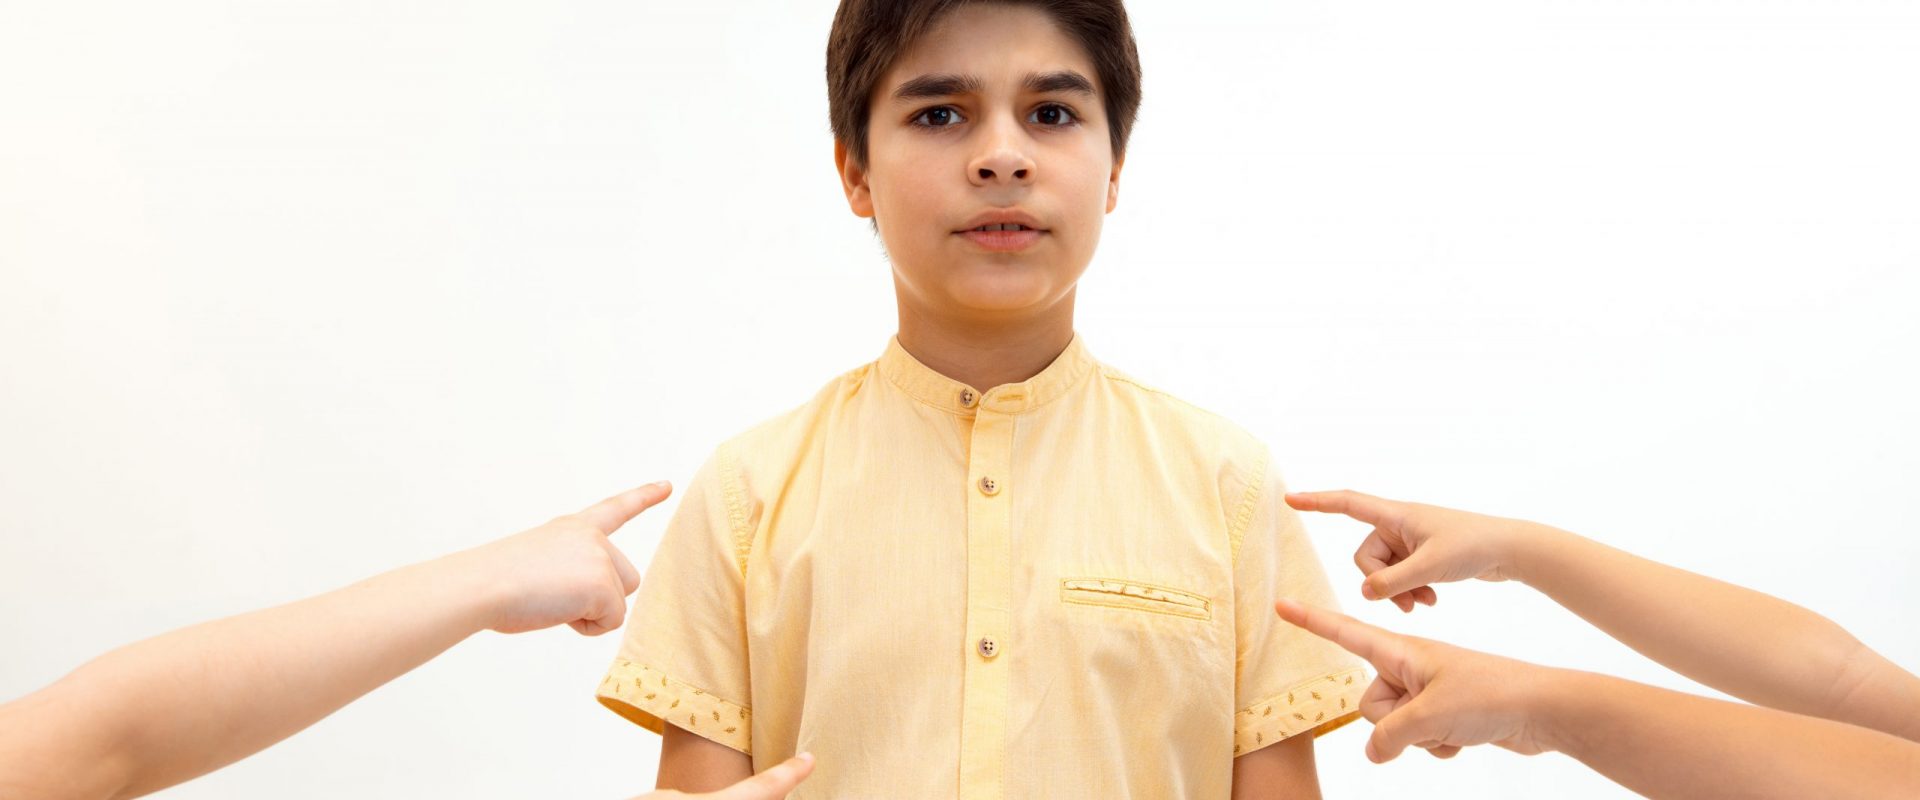 Little boy standing alone and suffering an act of bullying while children mocking in the background. Sad young schoolboy standing on studio against white background.